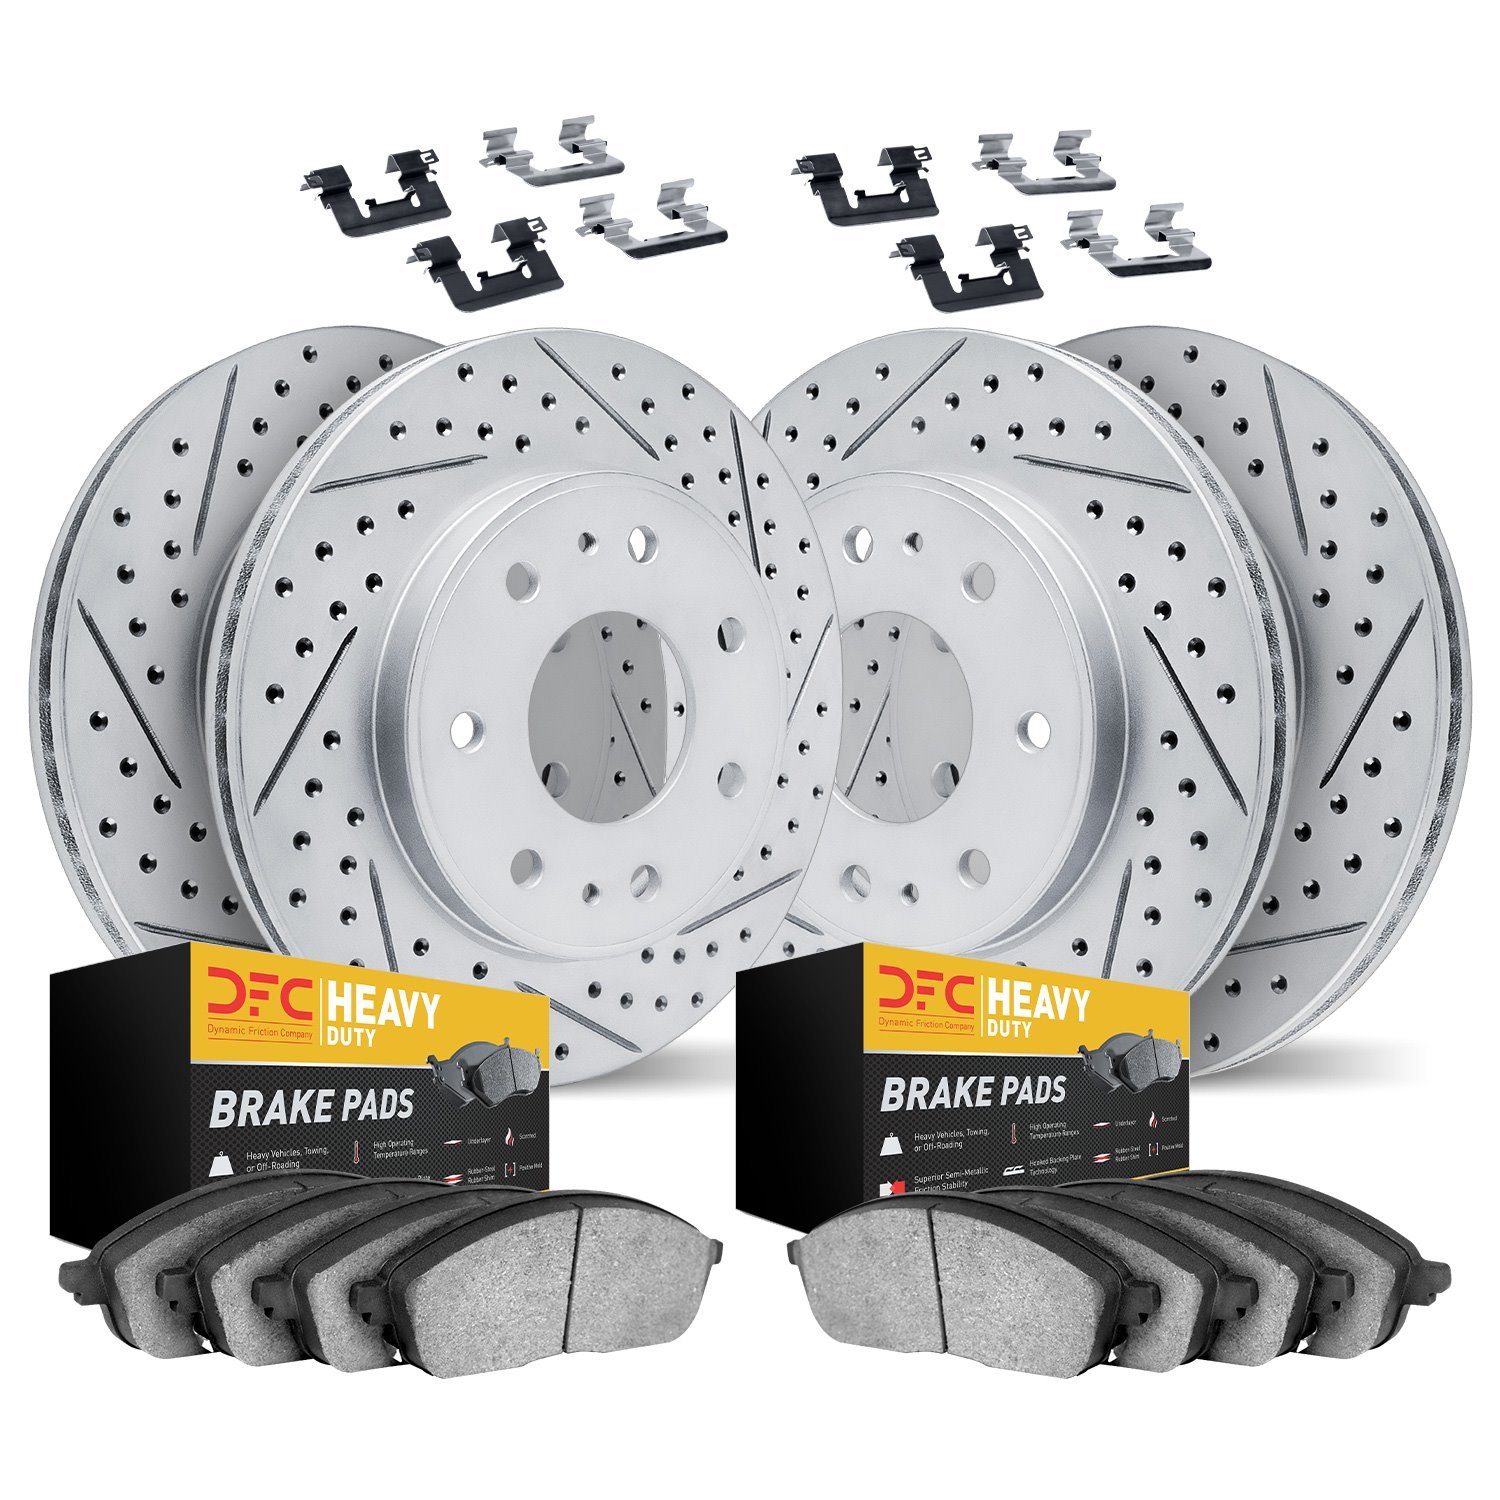 2214-99073 Geoperformance Drilled/Slotted Rotors w/Heavy-Duty Pads Kit & Hardware, 2010-2011 Ford/Lincoln/Mercury/Mazda, Positio